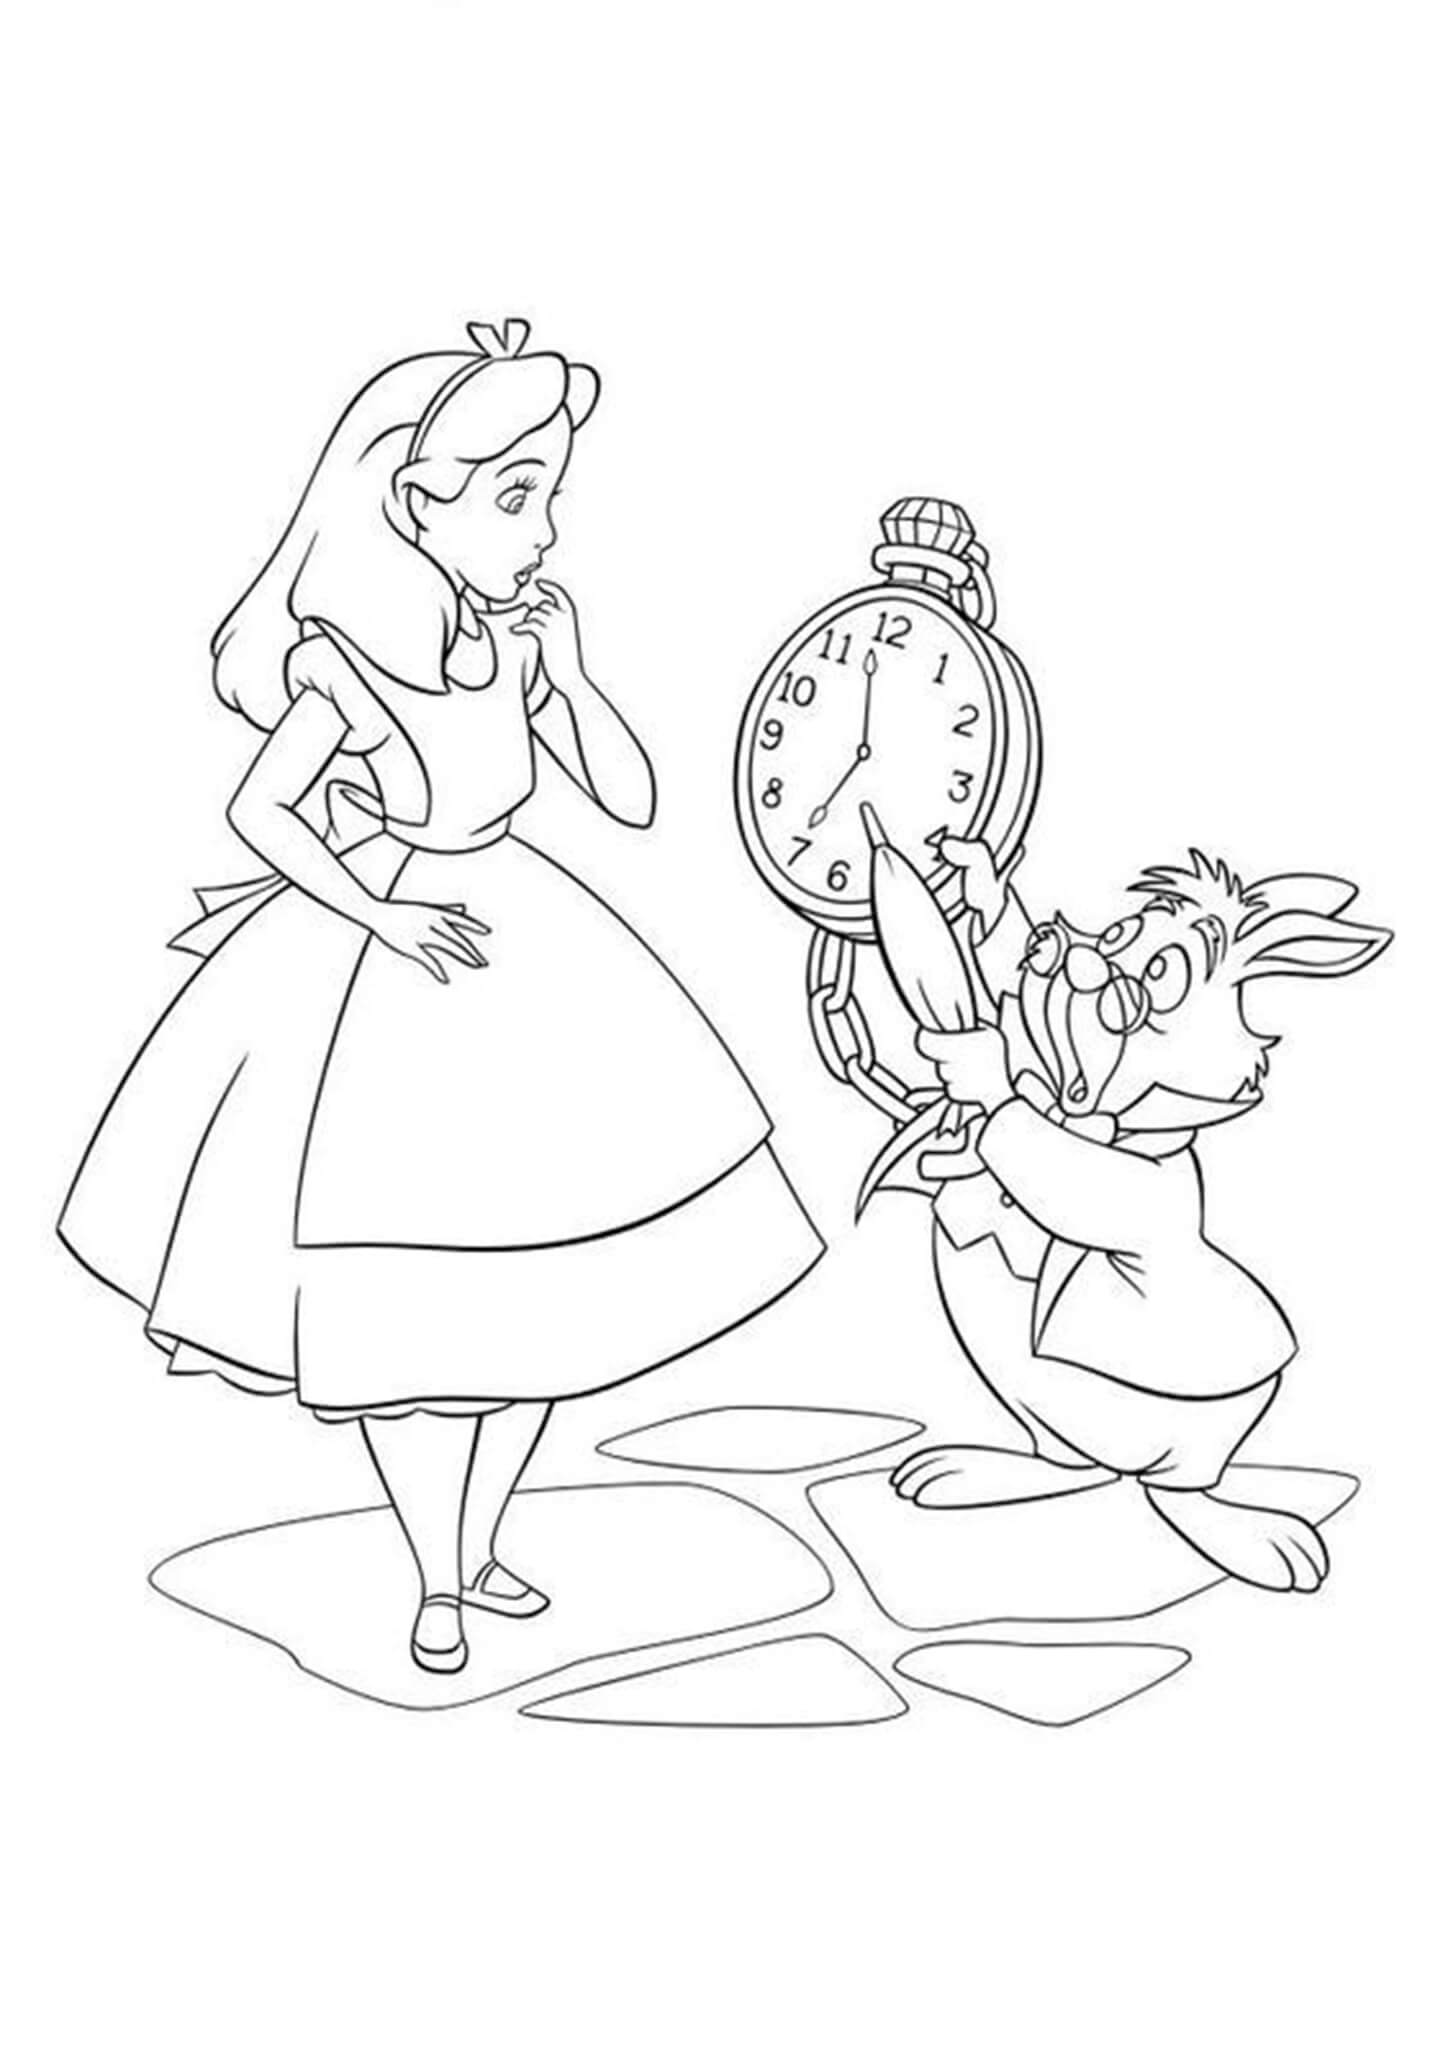 Free & Easy To Print Alice in Wonderland Coloring Pages Tulamama